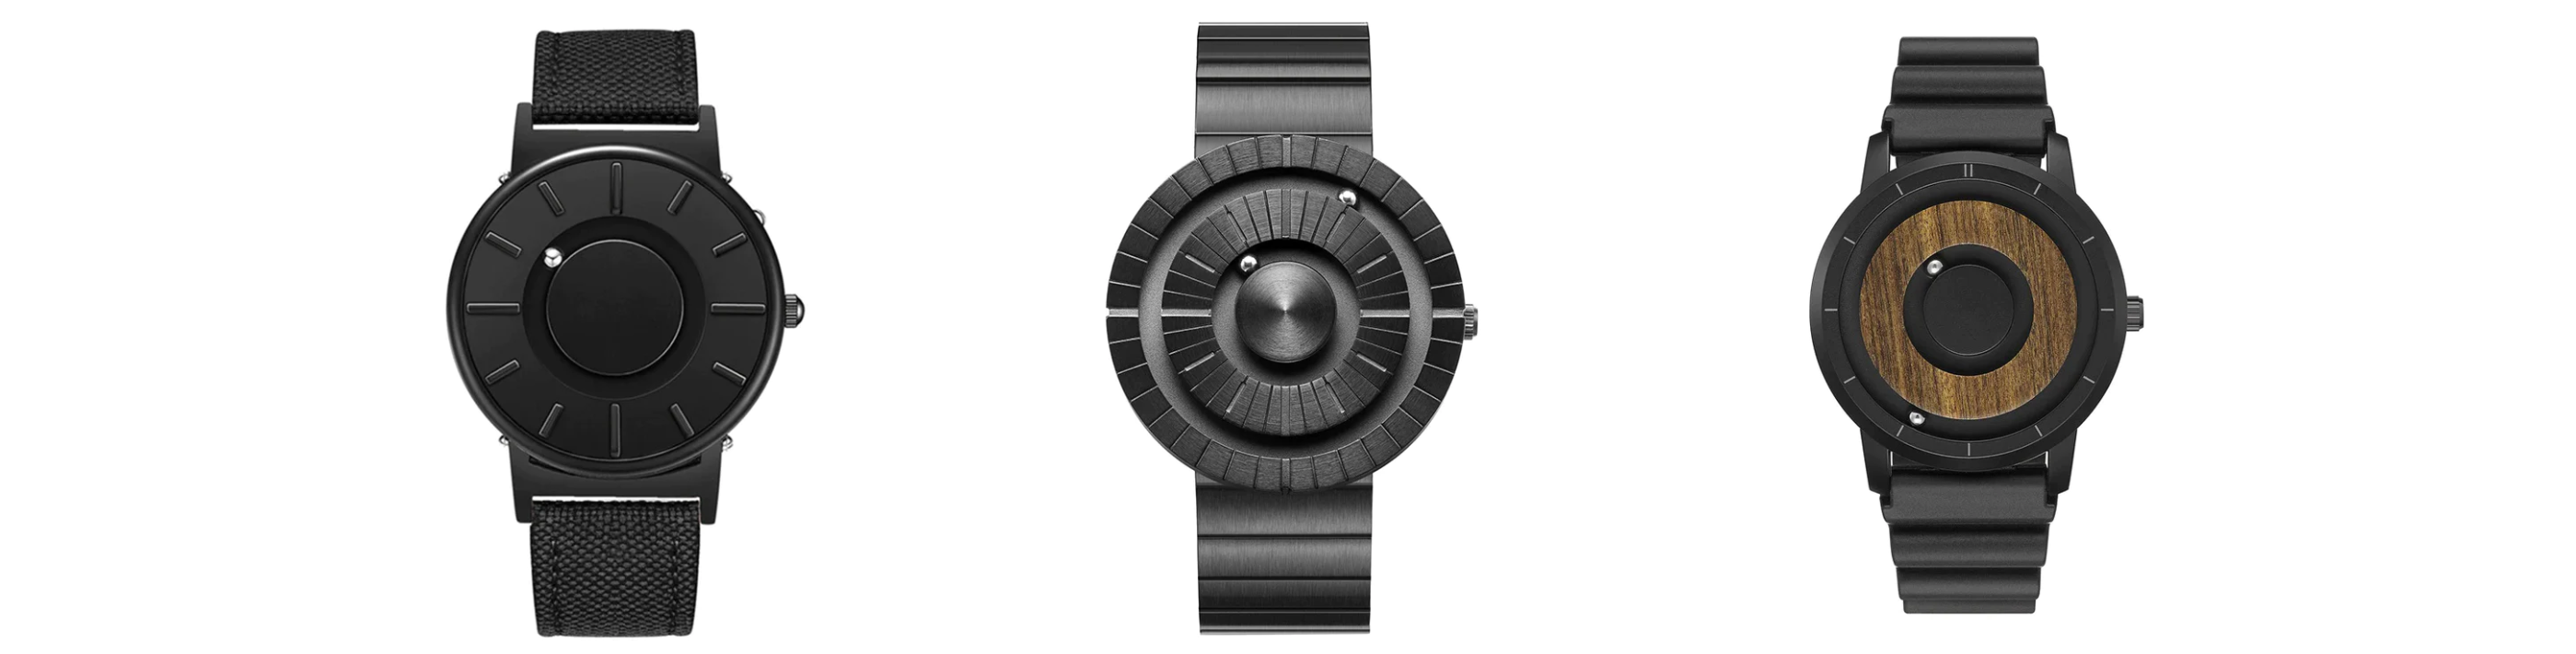 Magnetic Watch - Black | Watches for men, Mens fashion watches, Stylish  watches men